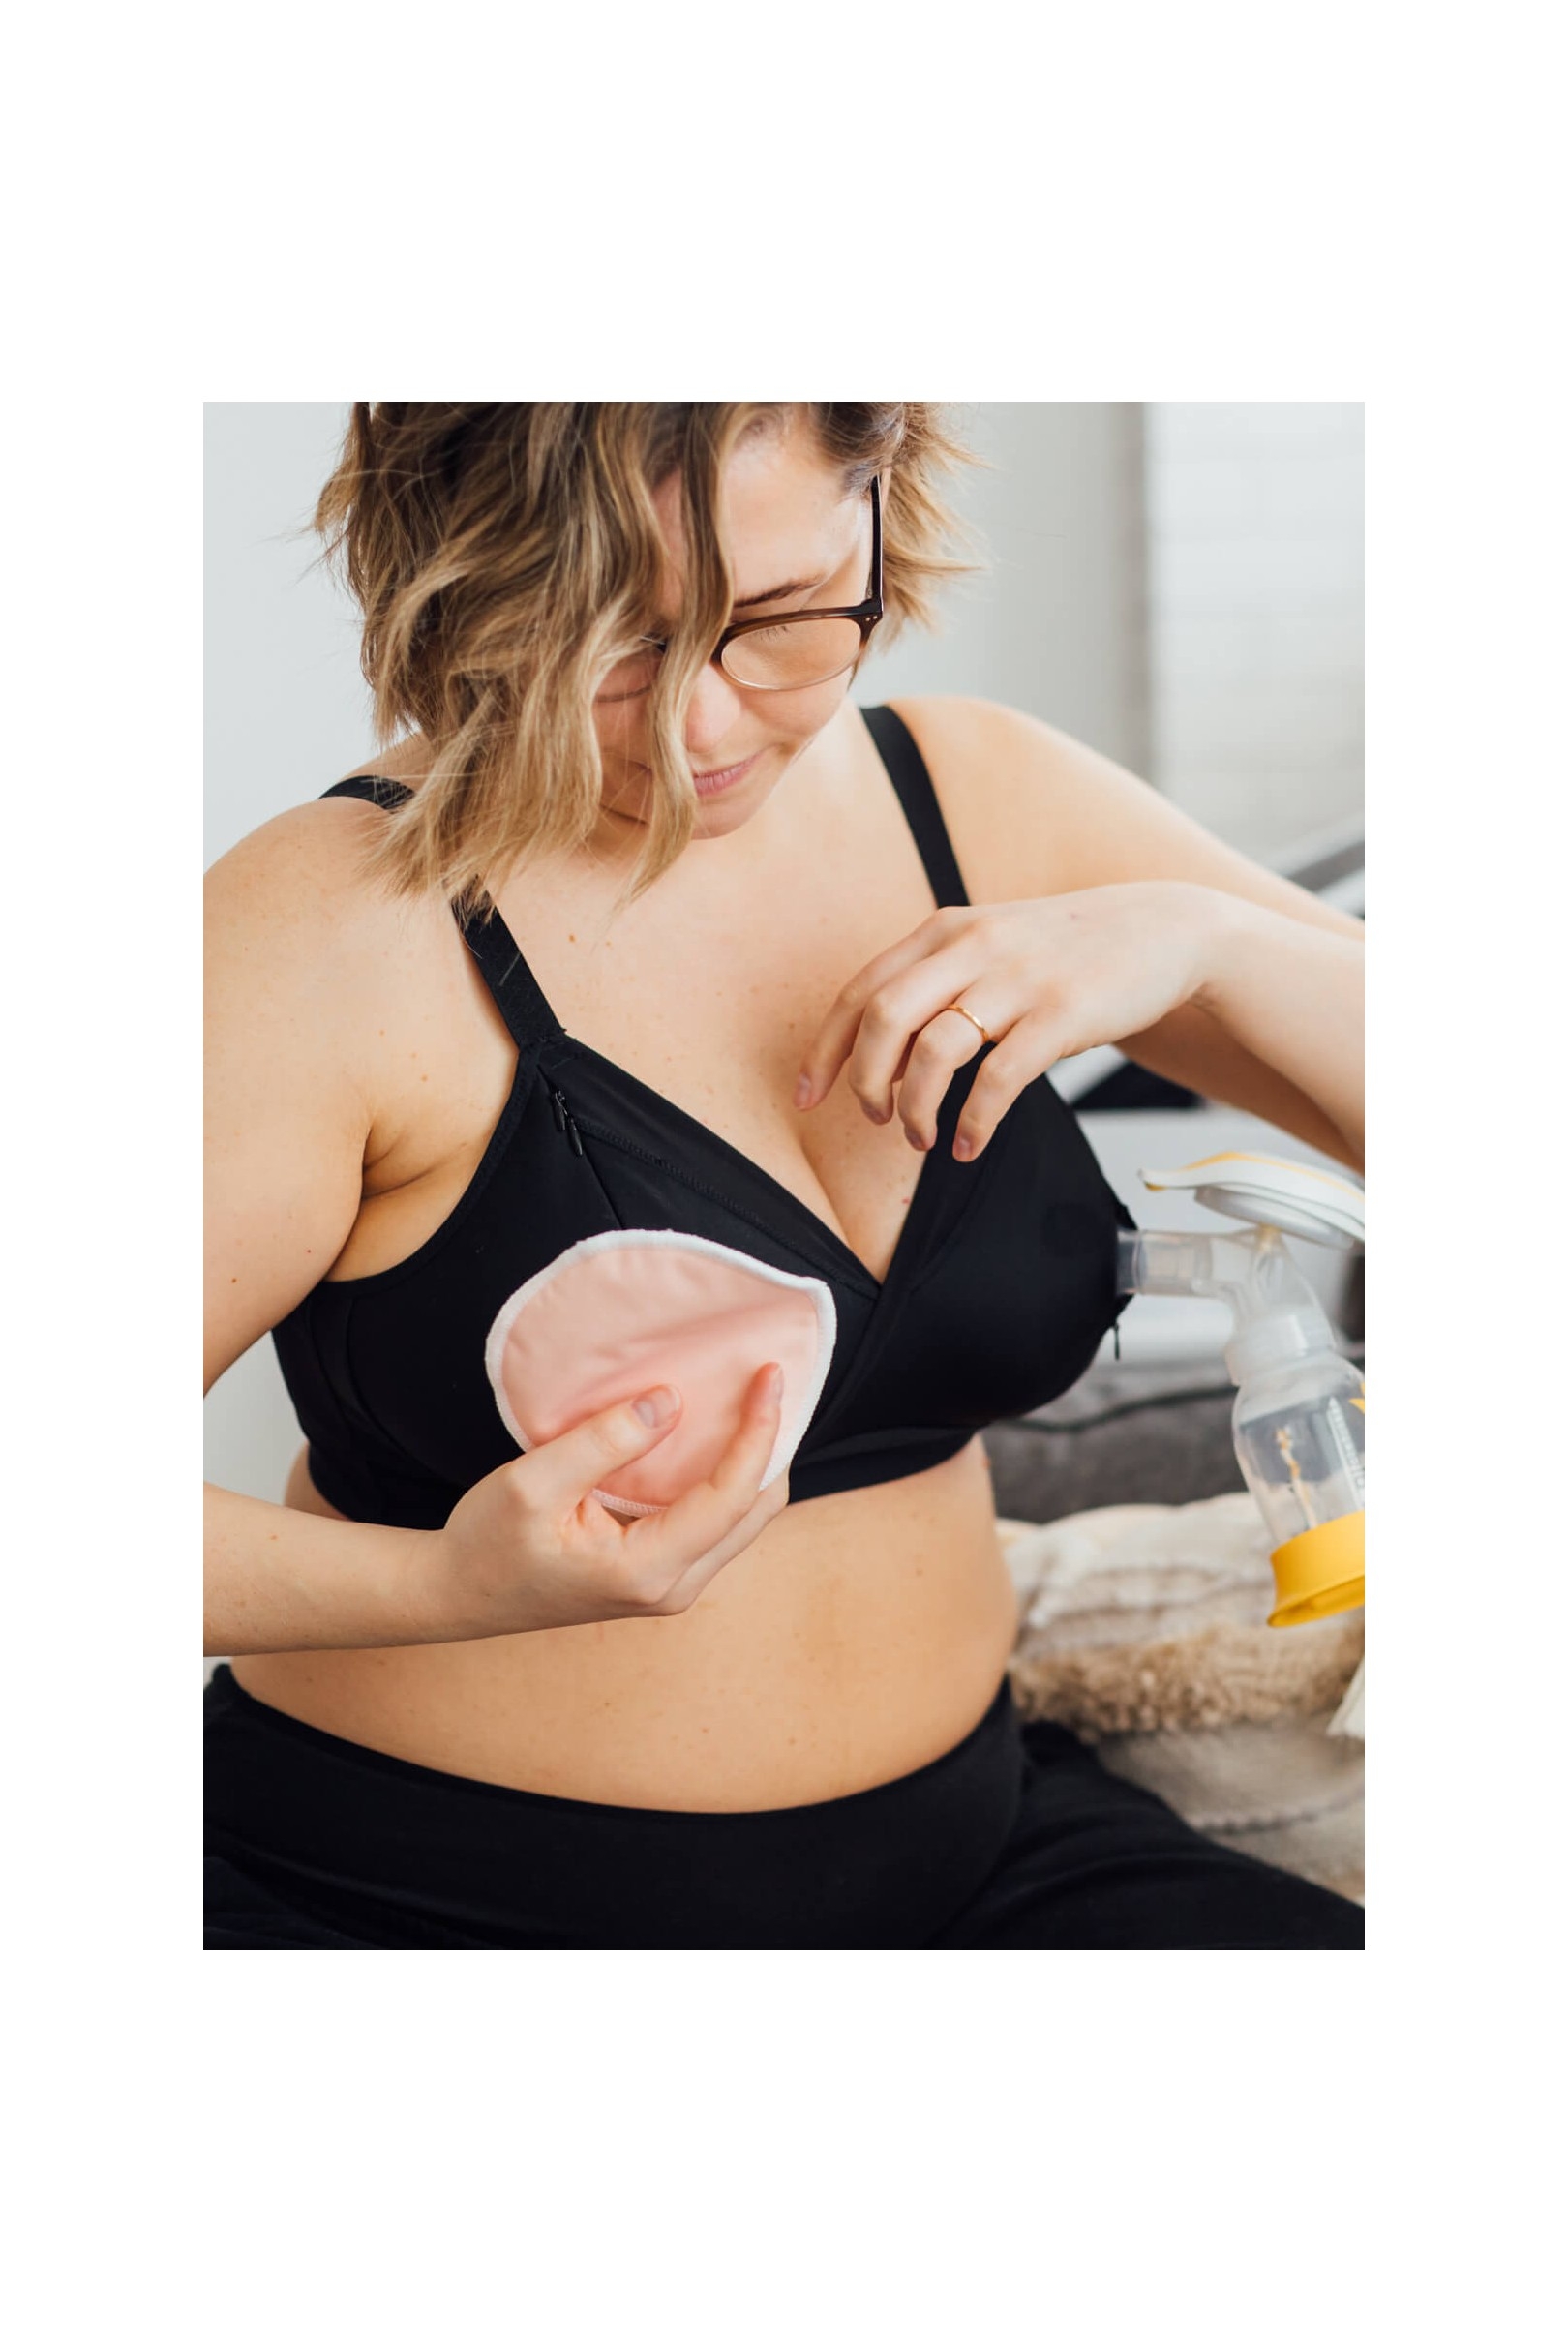 Hands Free Pumping Bra, Adjustable Breast-Pumps Holding and Zipper Nursing  Bra, Suitable for Breastfeeding-Pumps by(X-Large) , Philips Avent, Spectra